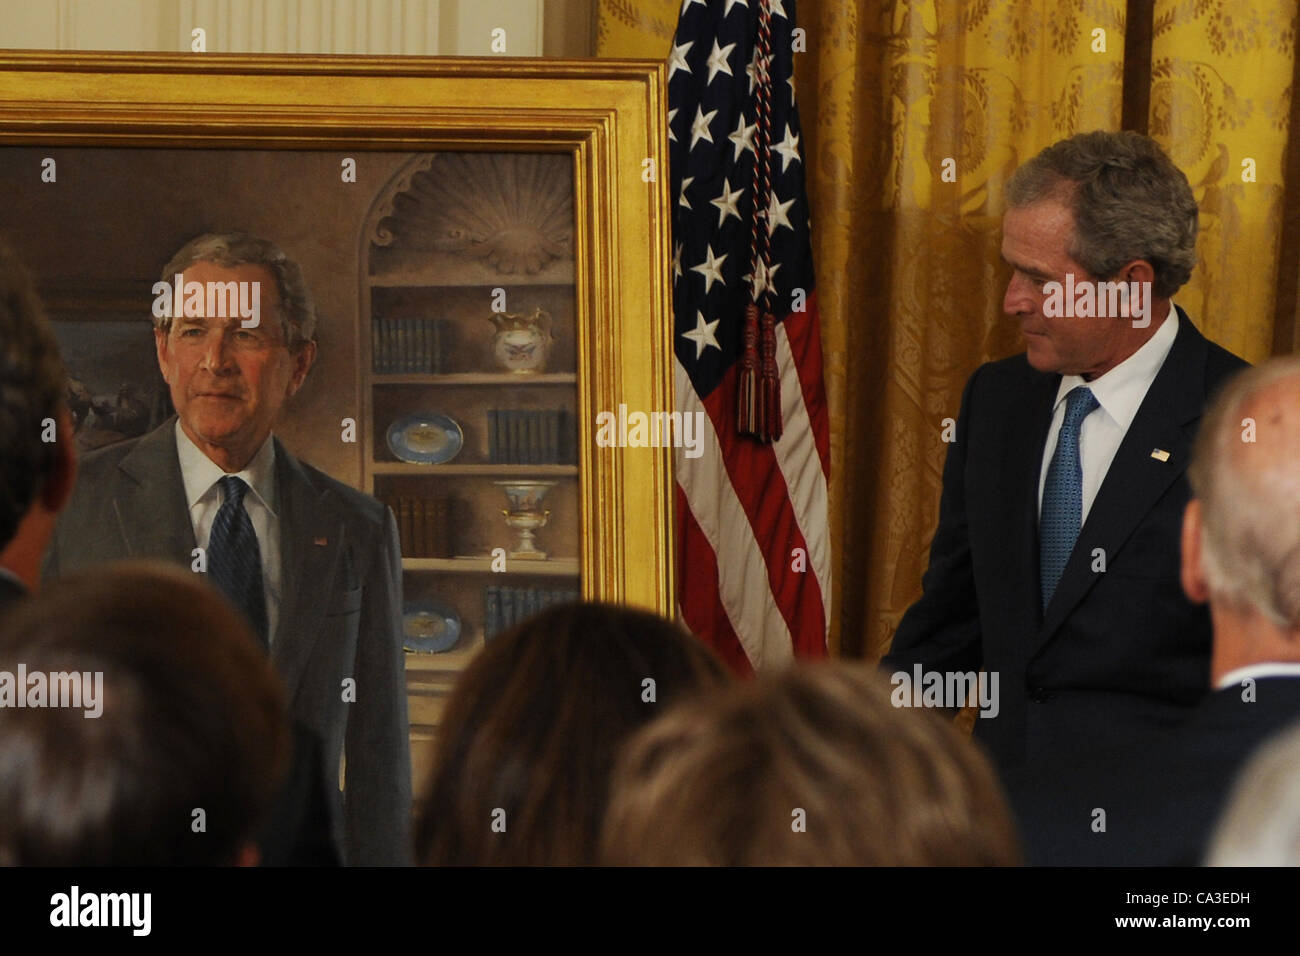 May 31, 2012 - Washington, District of Columbia, U.S. - Former President GEORGE W. BUSH stood next to his official portrait during a ceremony in the East Room of the White House on Thursday. (Credit Image: © Christy Bowe/Globe Photos/ZUMAPRESS.com) Stock Photo